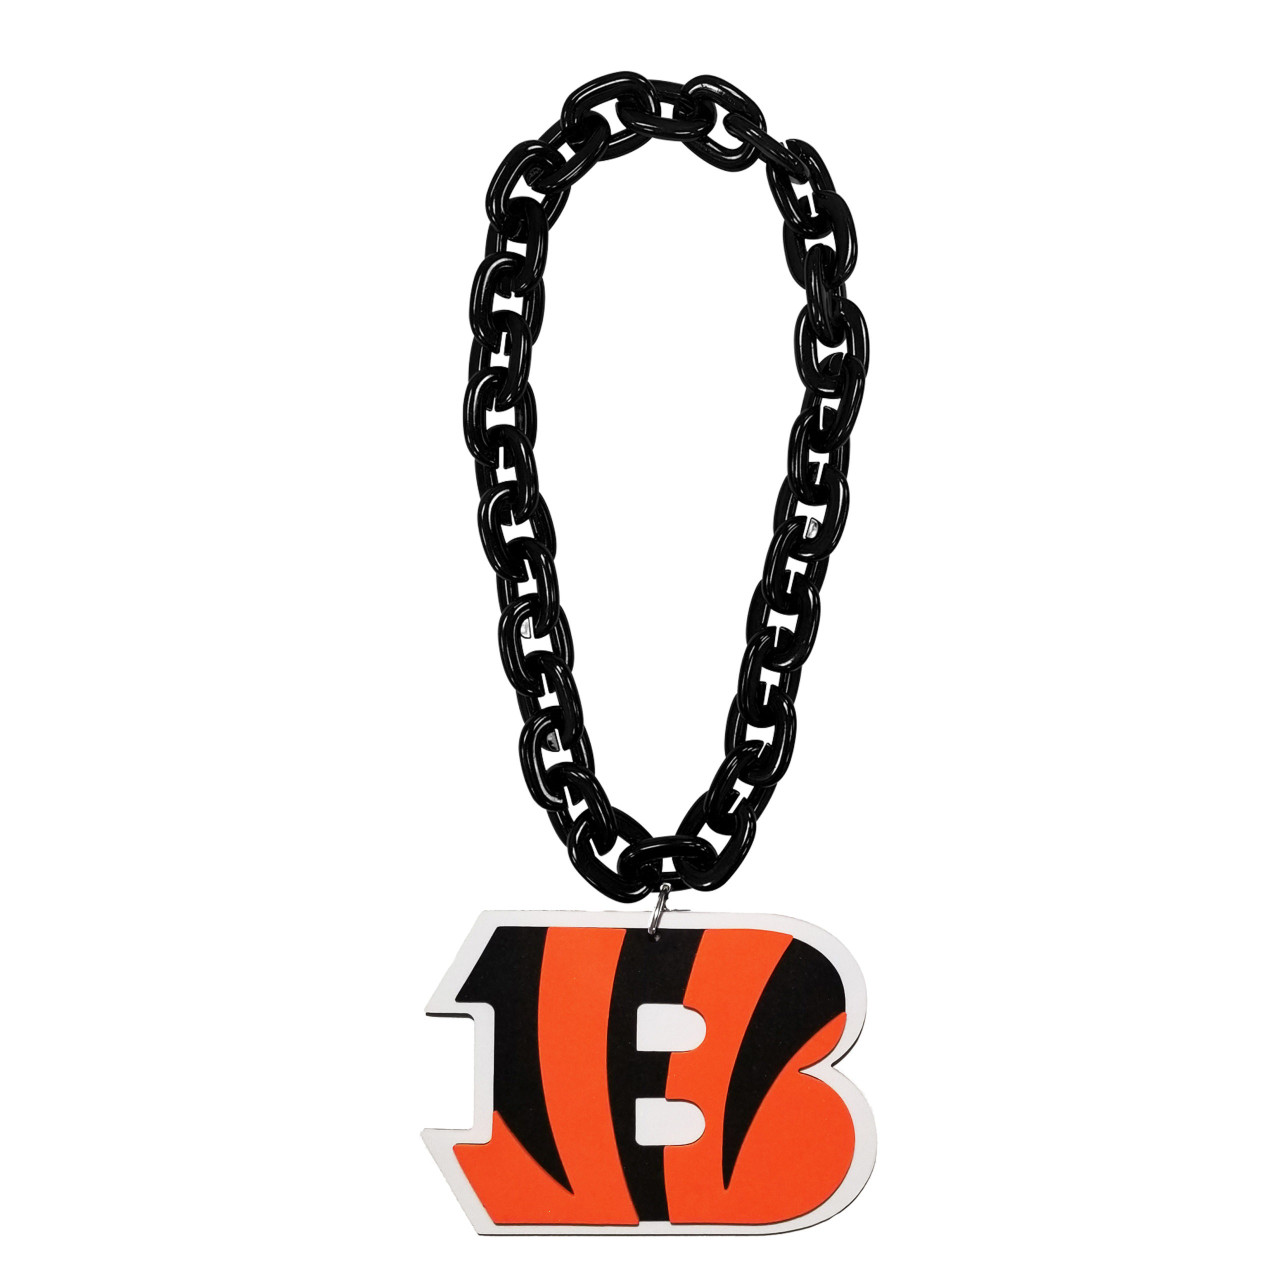 Bengals QB Joe Burrow confirms his diamond chain is the real deal after AFC  championship win - YouTube